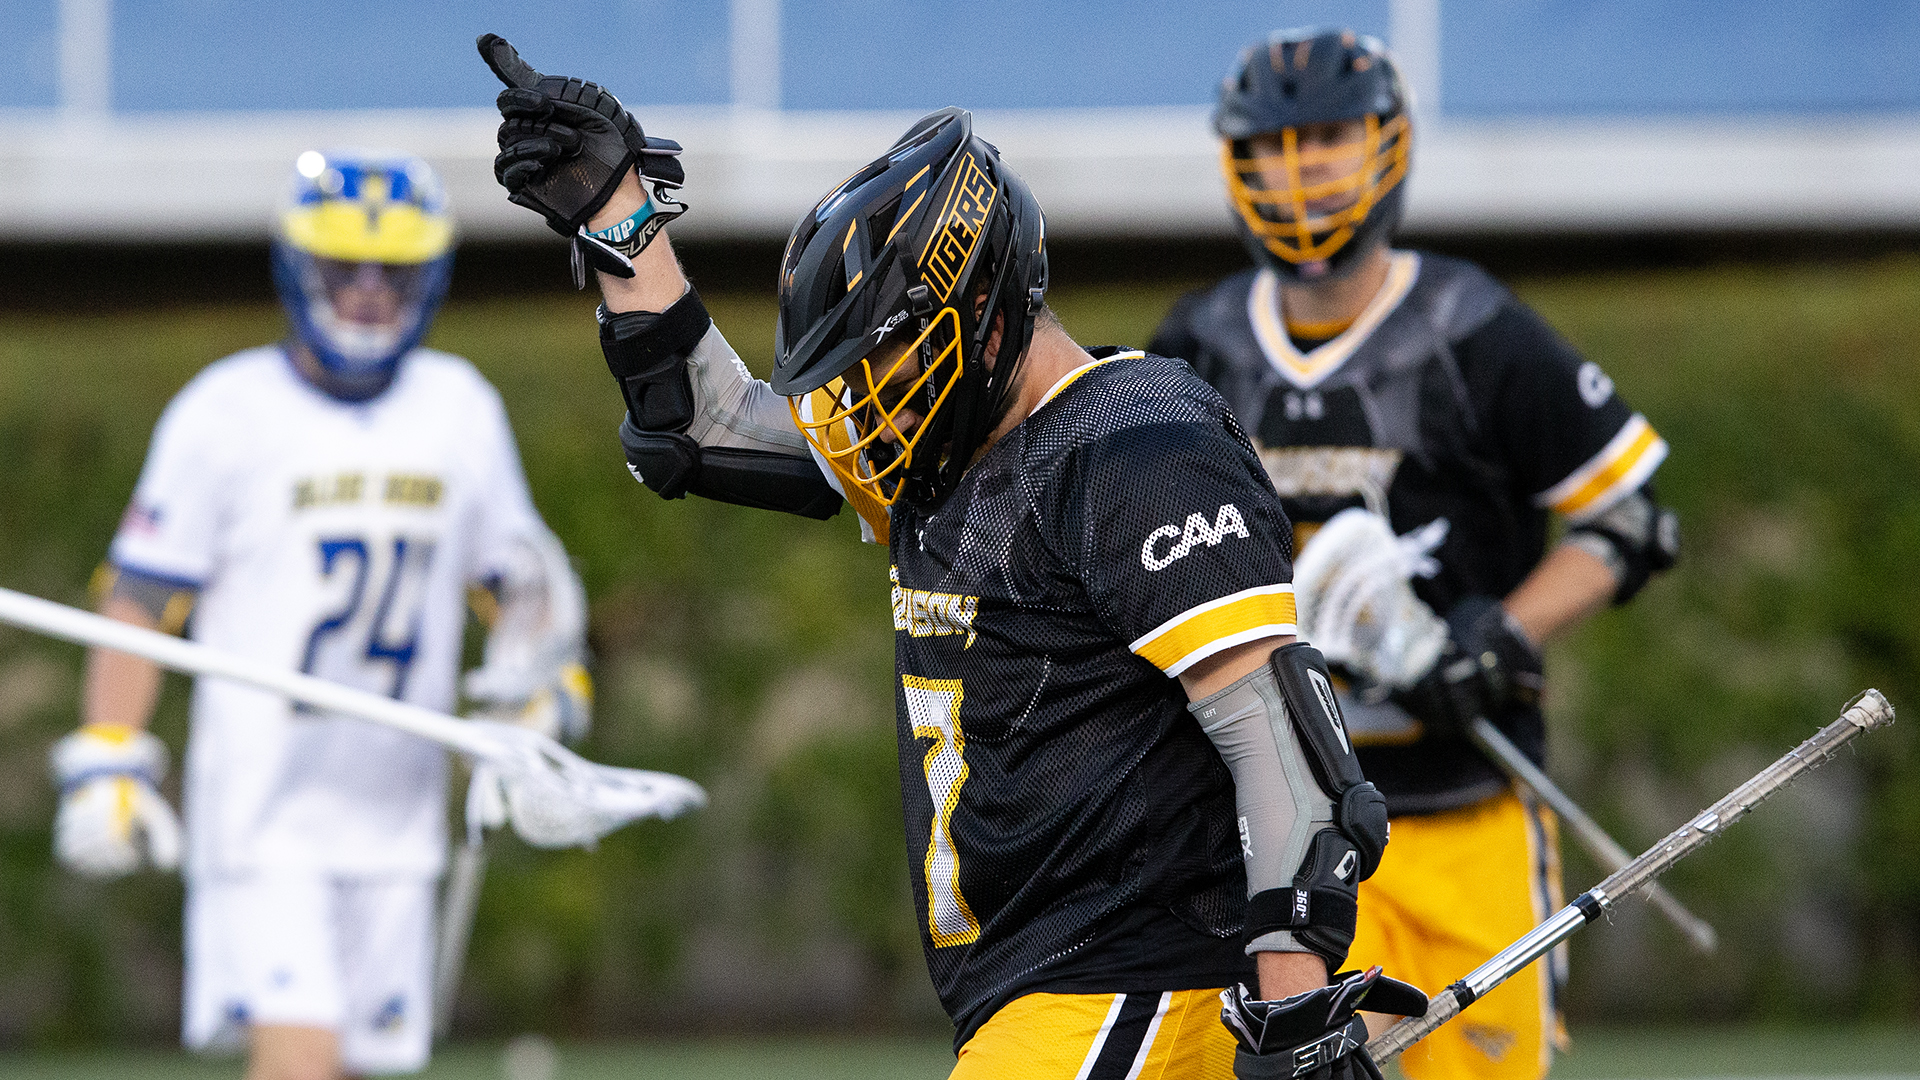 Towson's Nick DiMaio celebrates after scoring one of his three goals at Delaware on Friday.